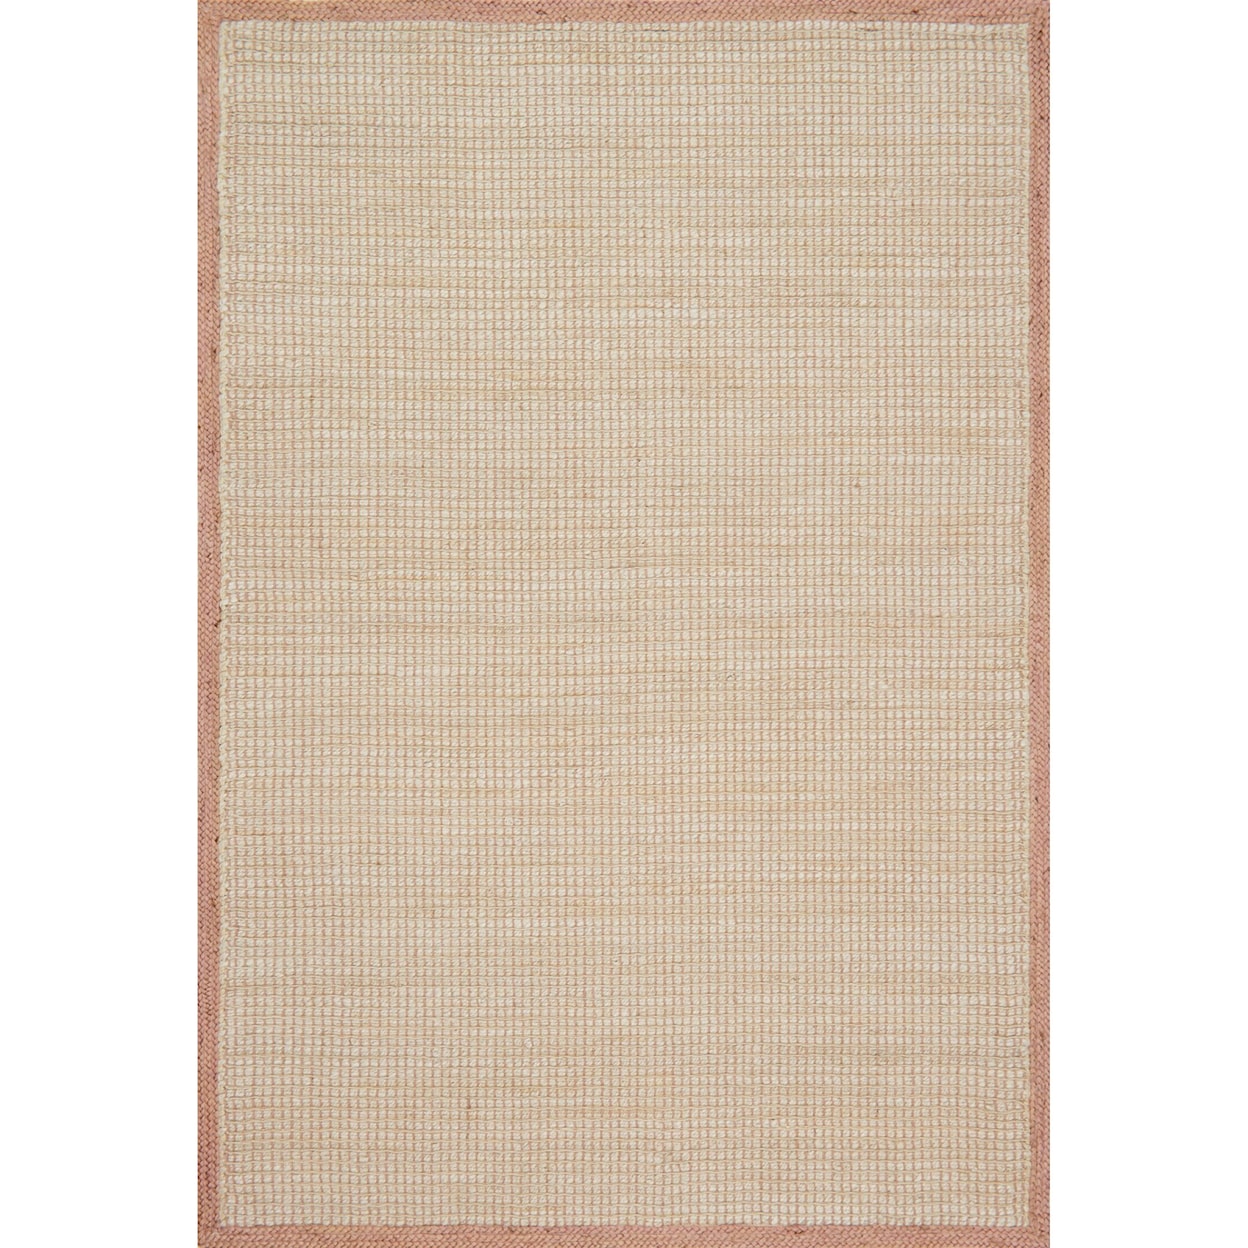 Magnolia Home by Joanna Gaines for Loloi Sydney 7' 9" x 9' 9" Rectangle Rug